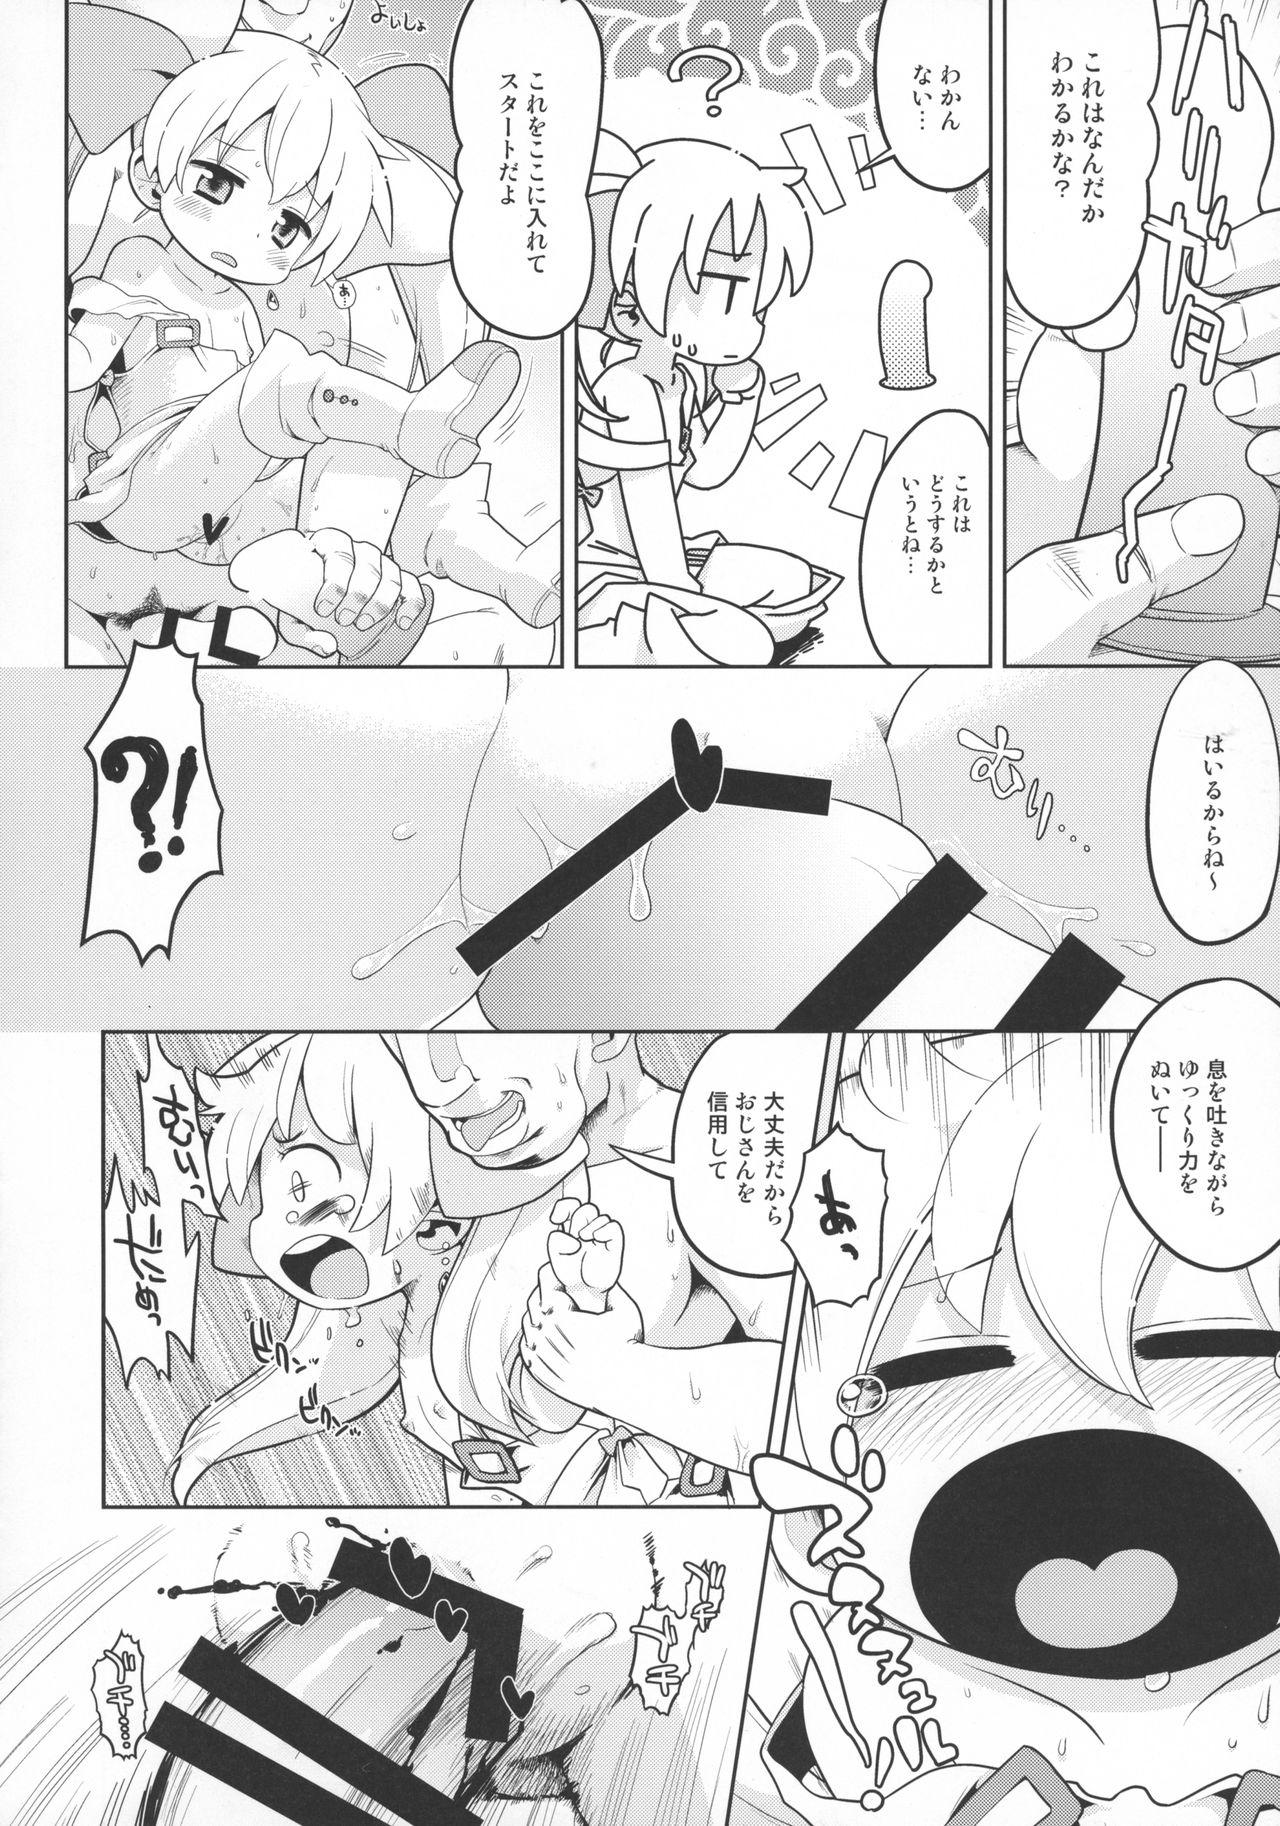 Foursome Sono Yokubou wa Eien - Selector infected wixoss Chica - Page 10